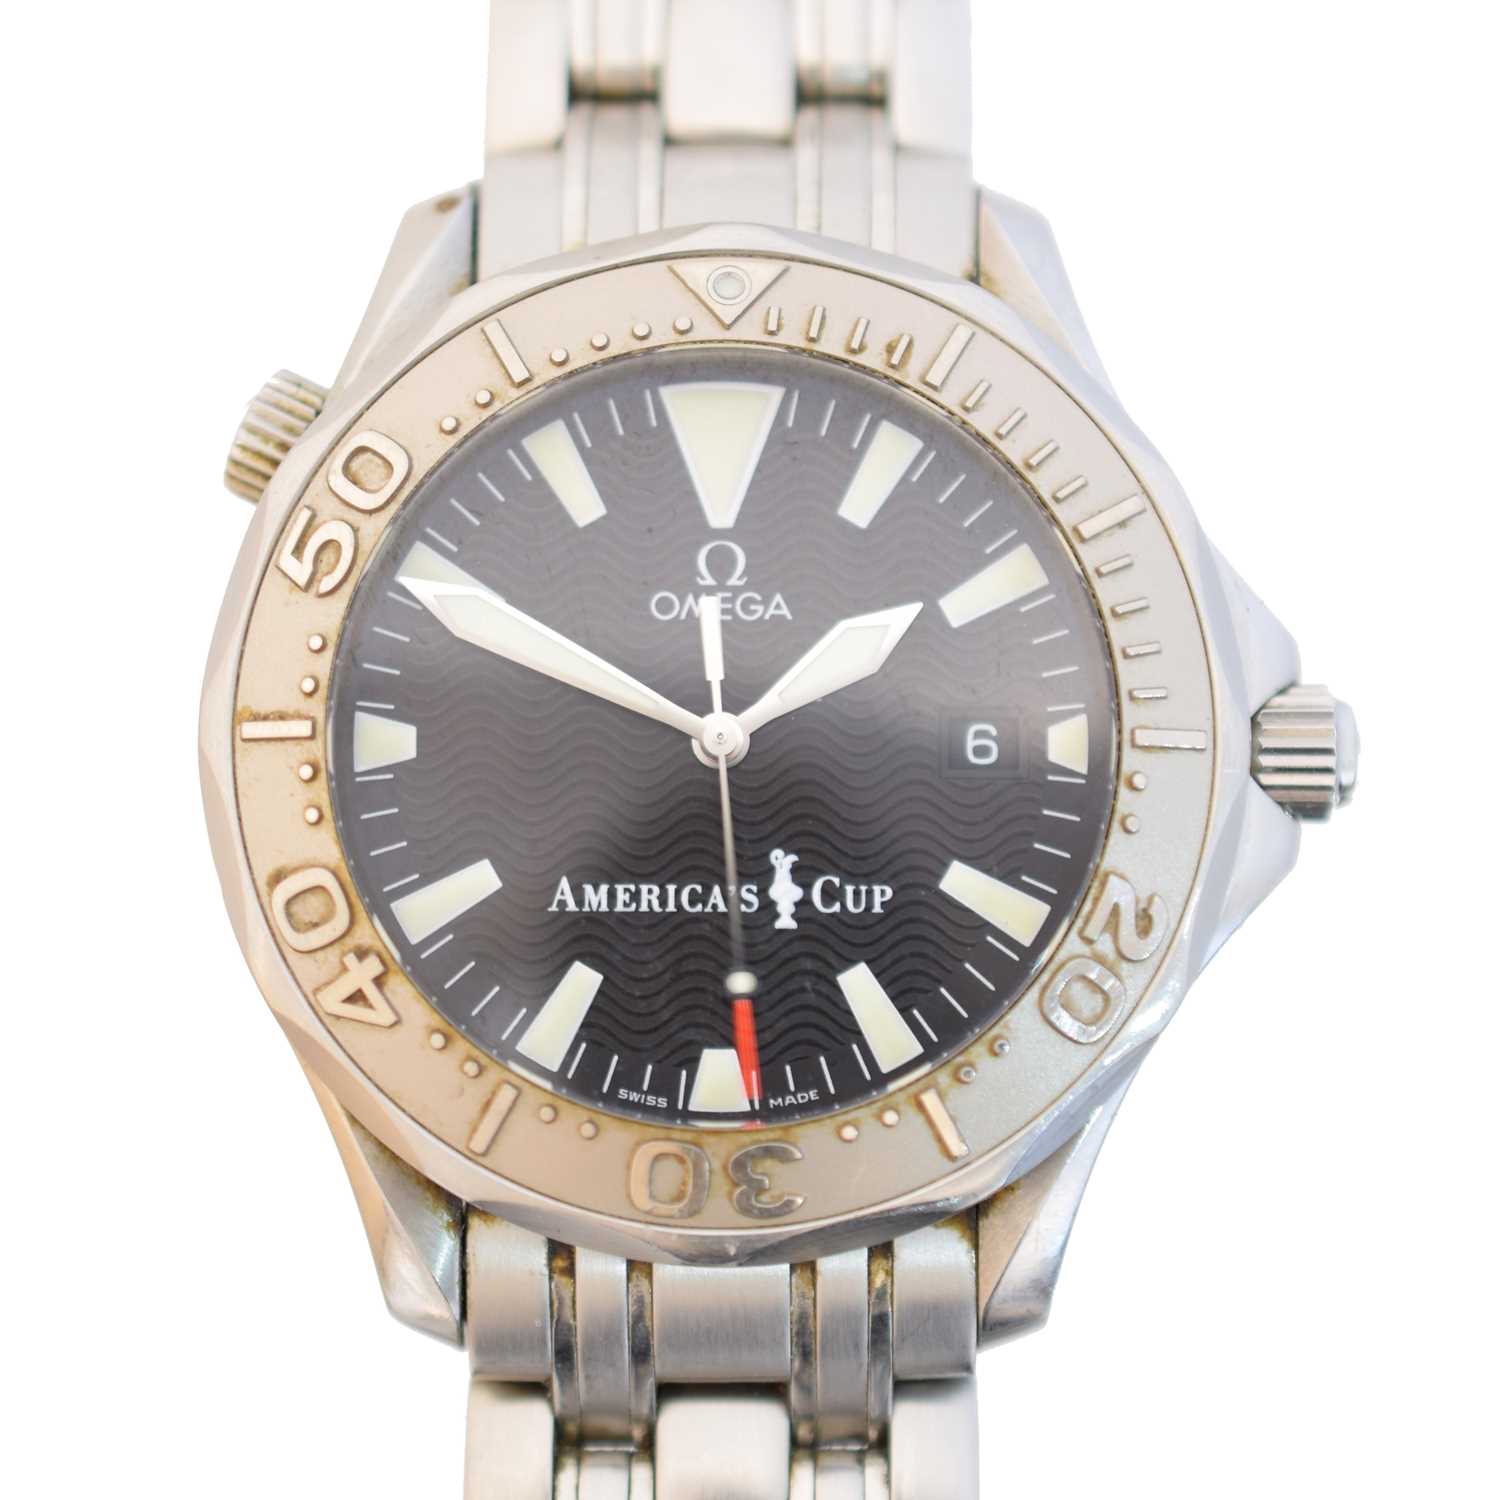 Lot A stainless steel and gold Omega Seamaster Limited Edition ‘America’s Cup’ watch